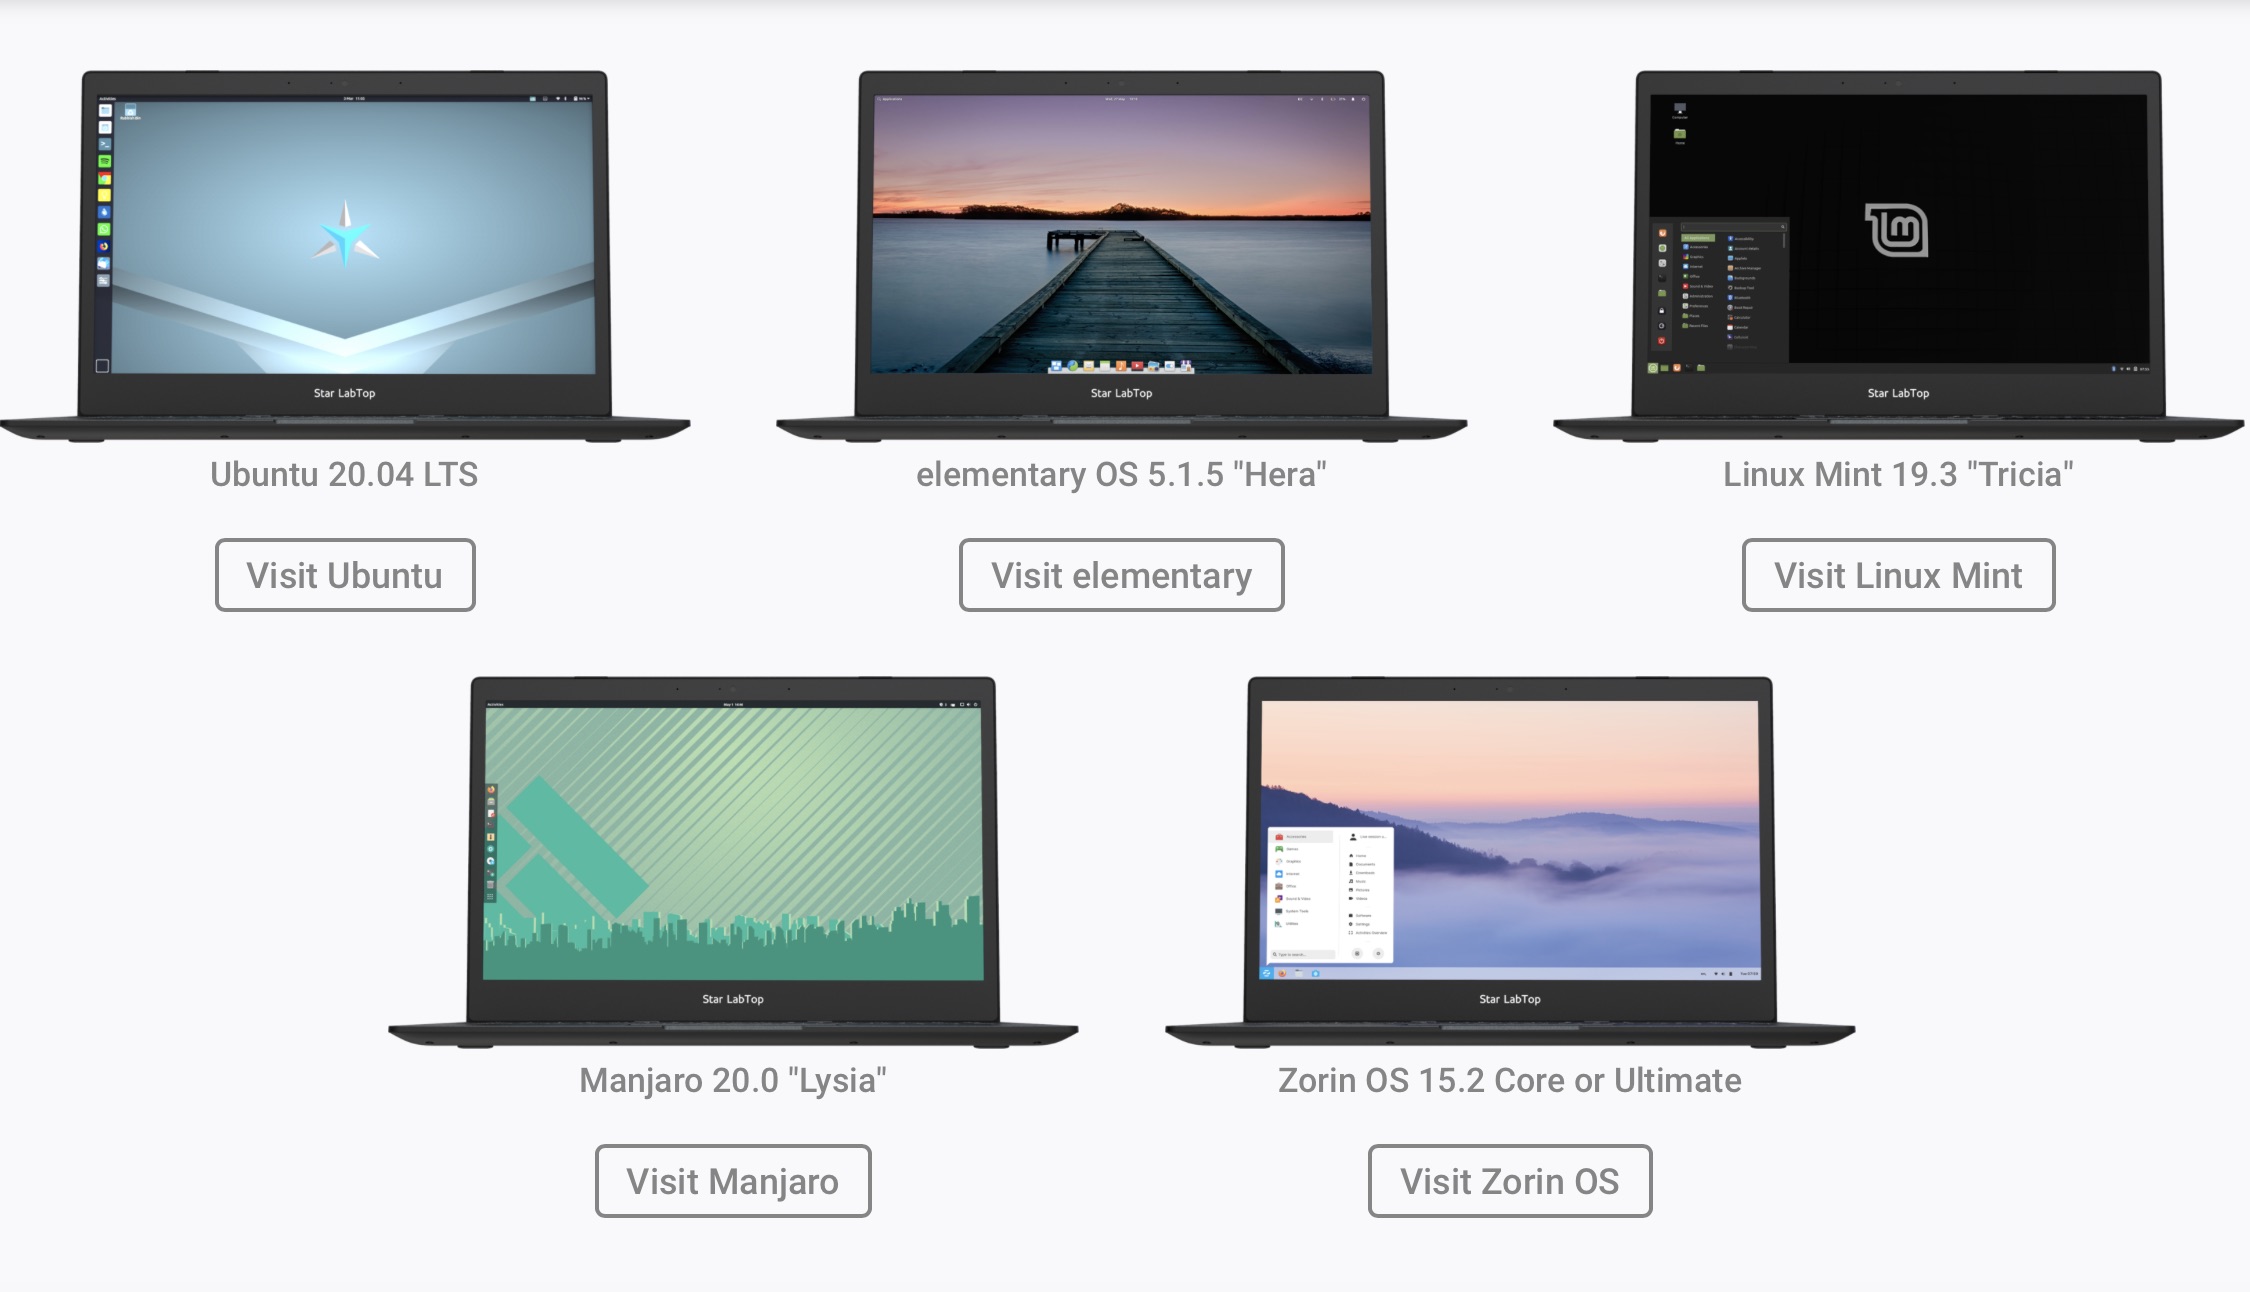 Star Labs Now Offers elementary OS as an OS Choice for Its Linux Laptops